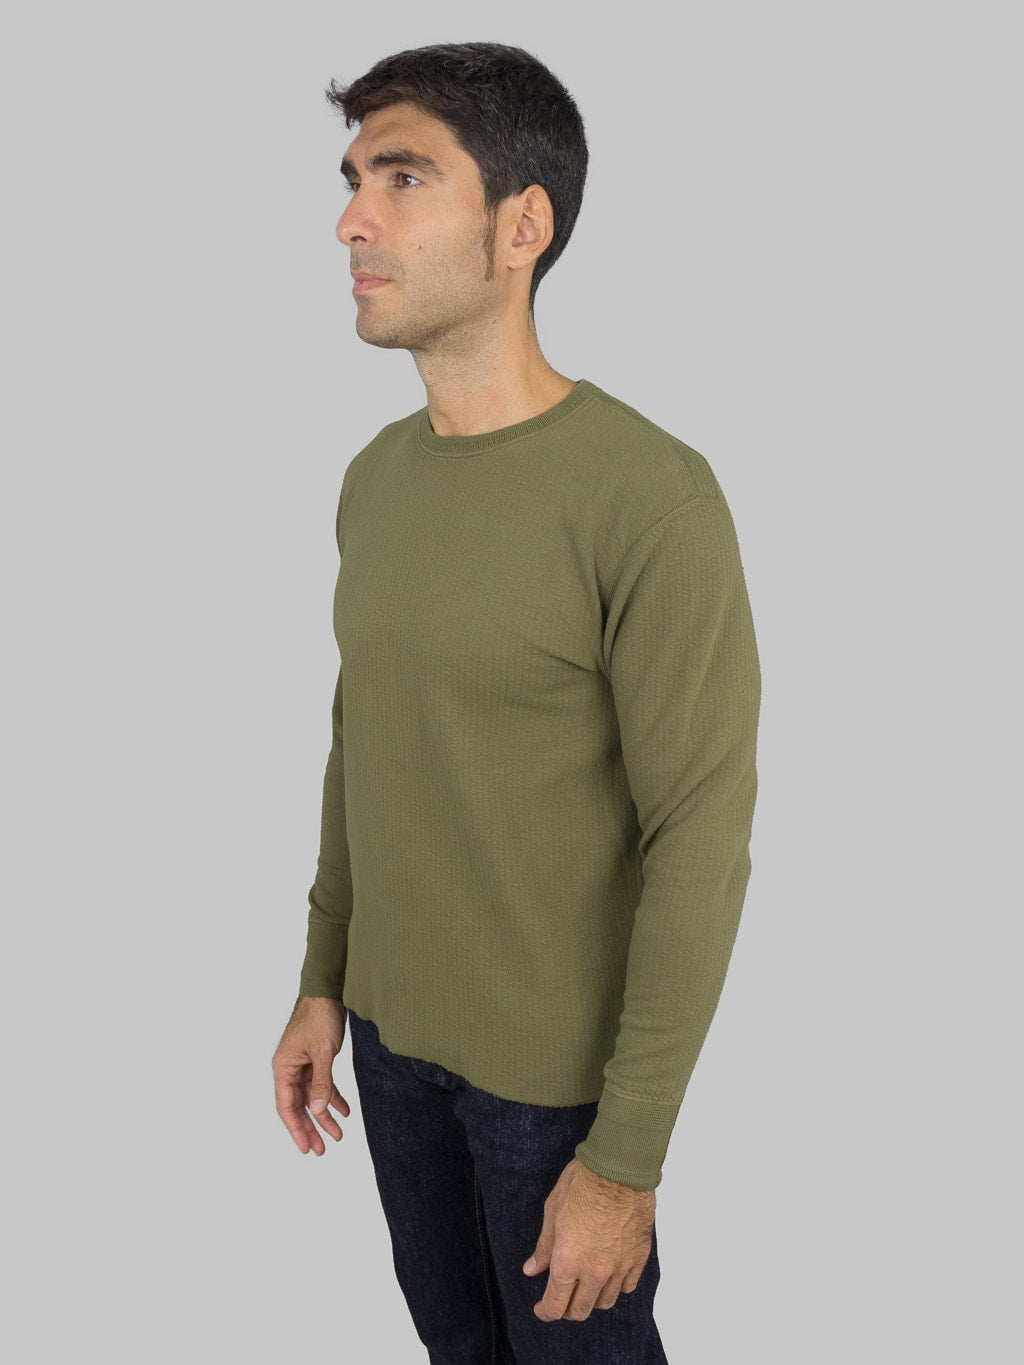 Loop Weft Double Face Jacquard crewneck Thermal army olive  side fit